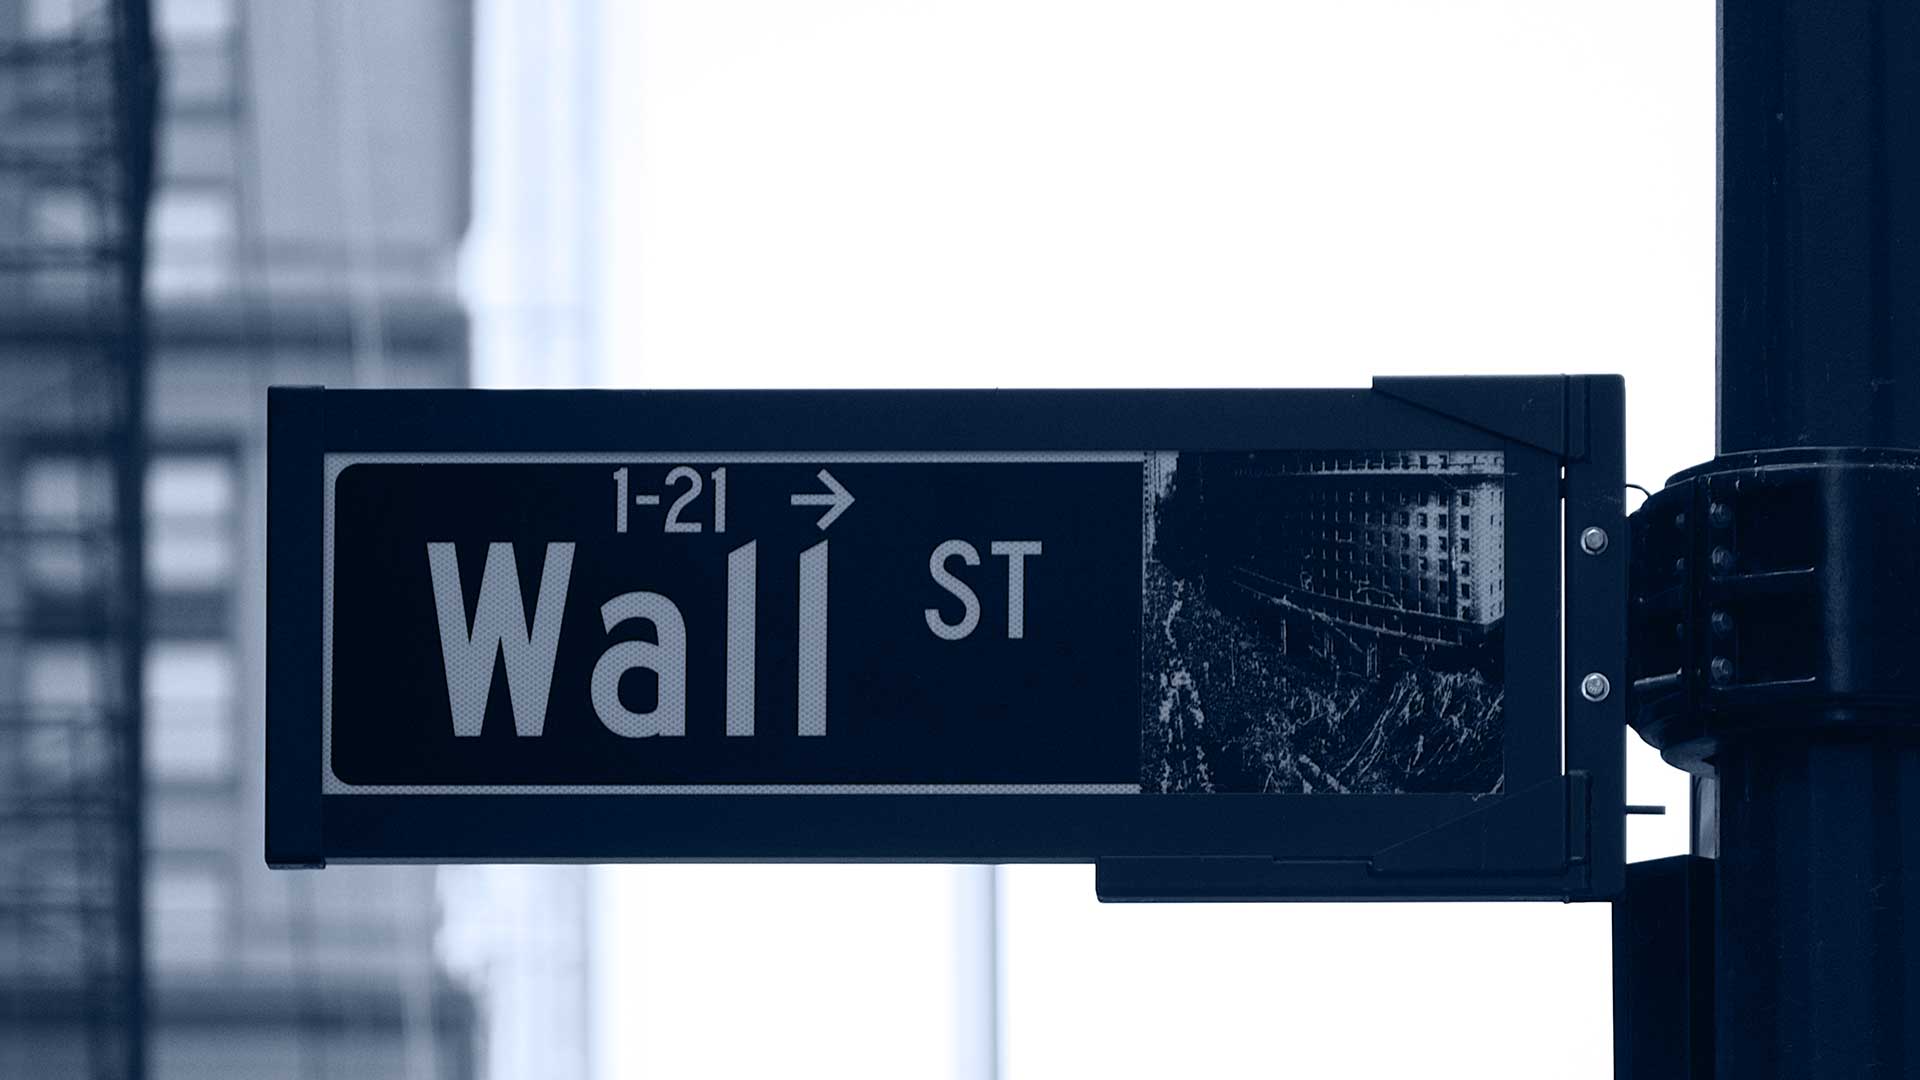 Wall st sign.